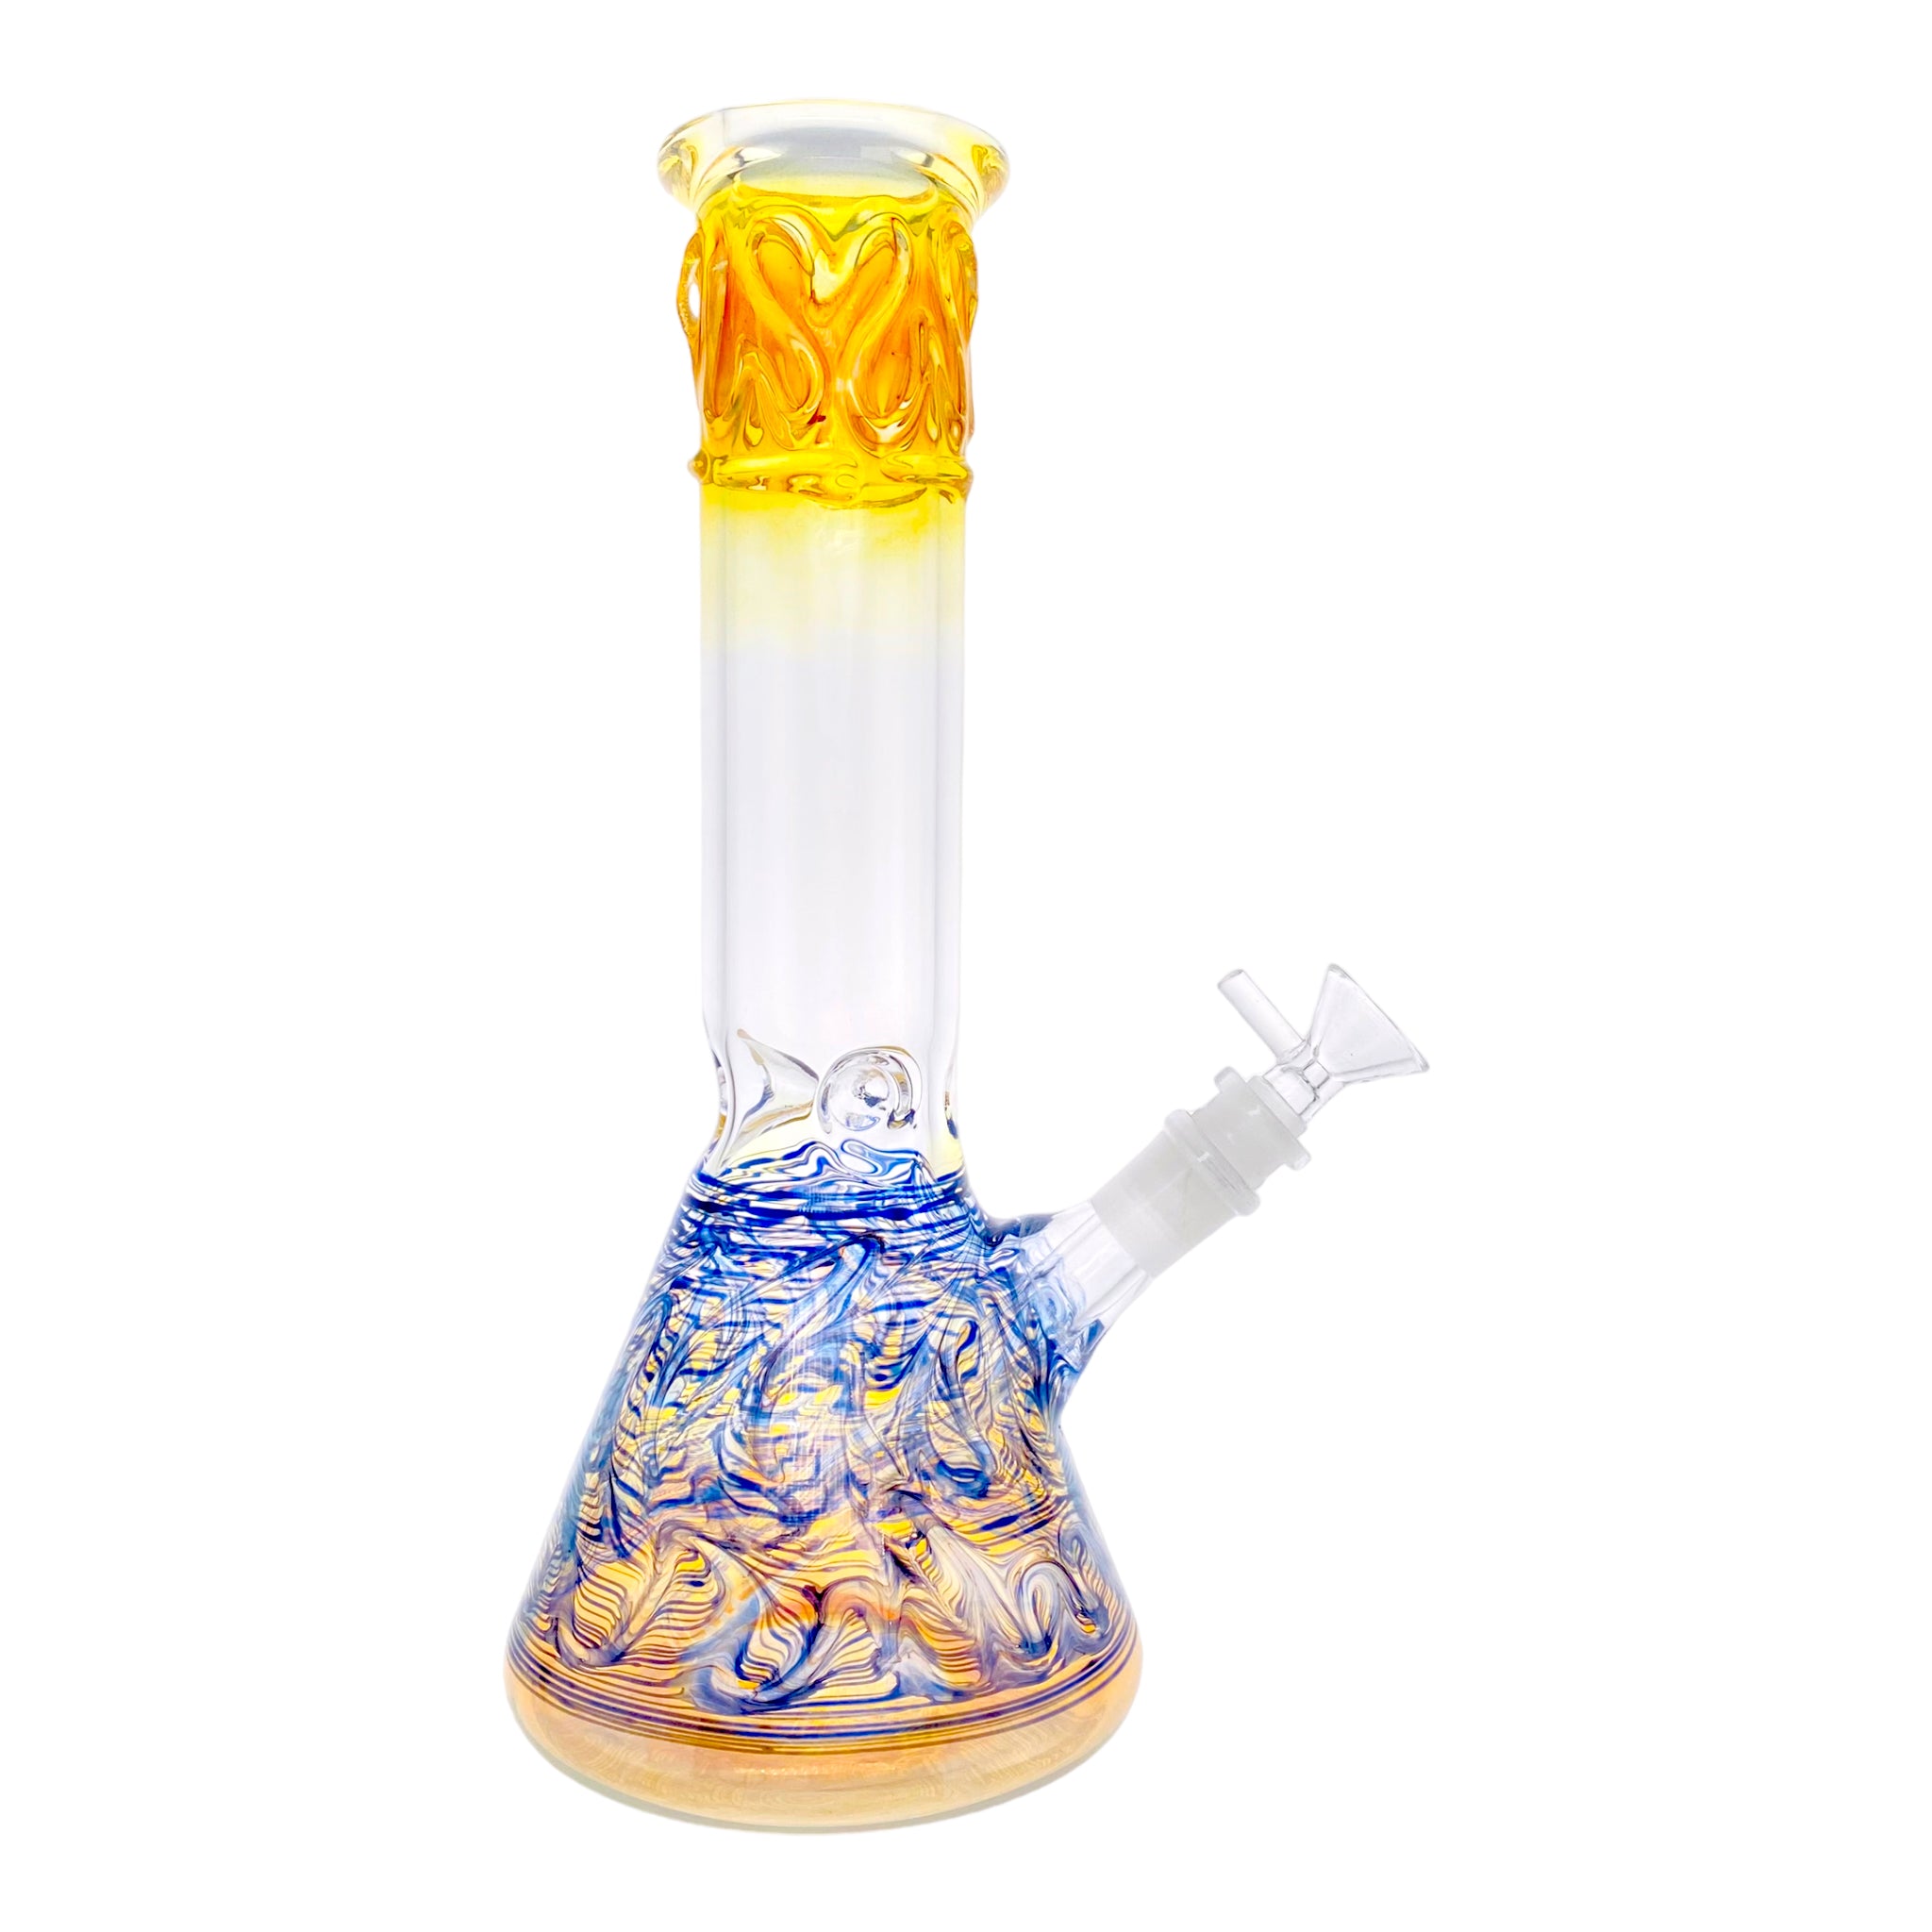 12 Inch Beaker Bong With Color Changing Fuming And Blue Wrap And Rake